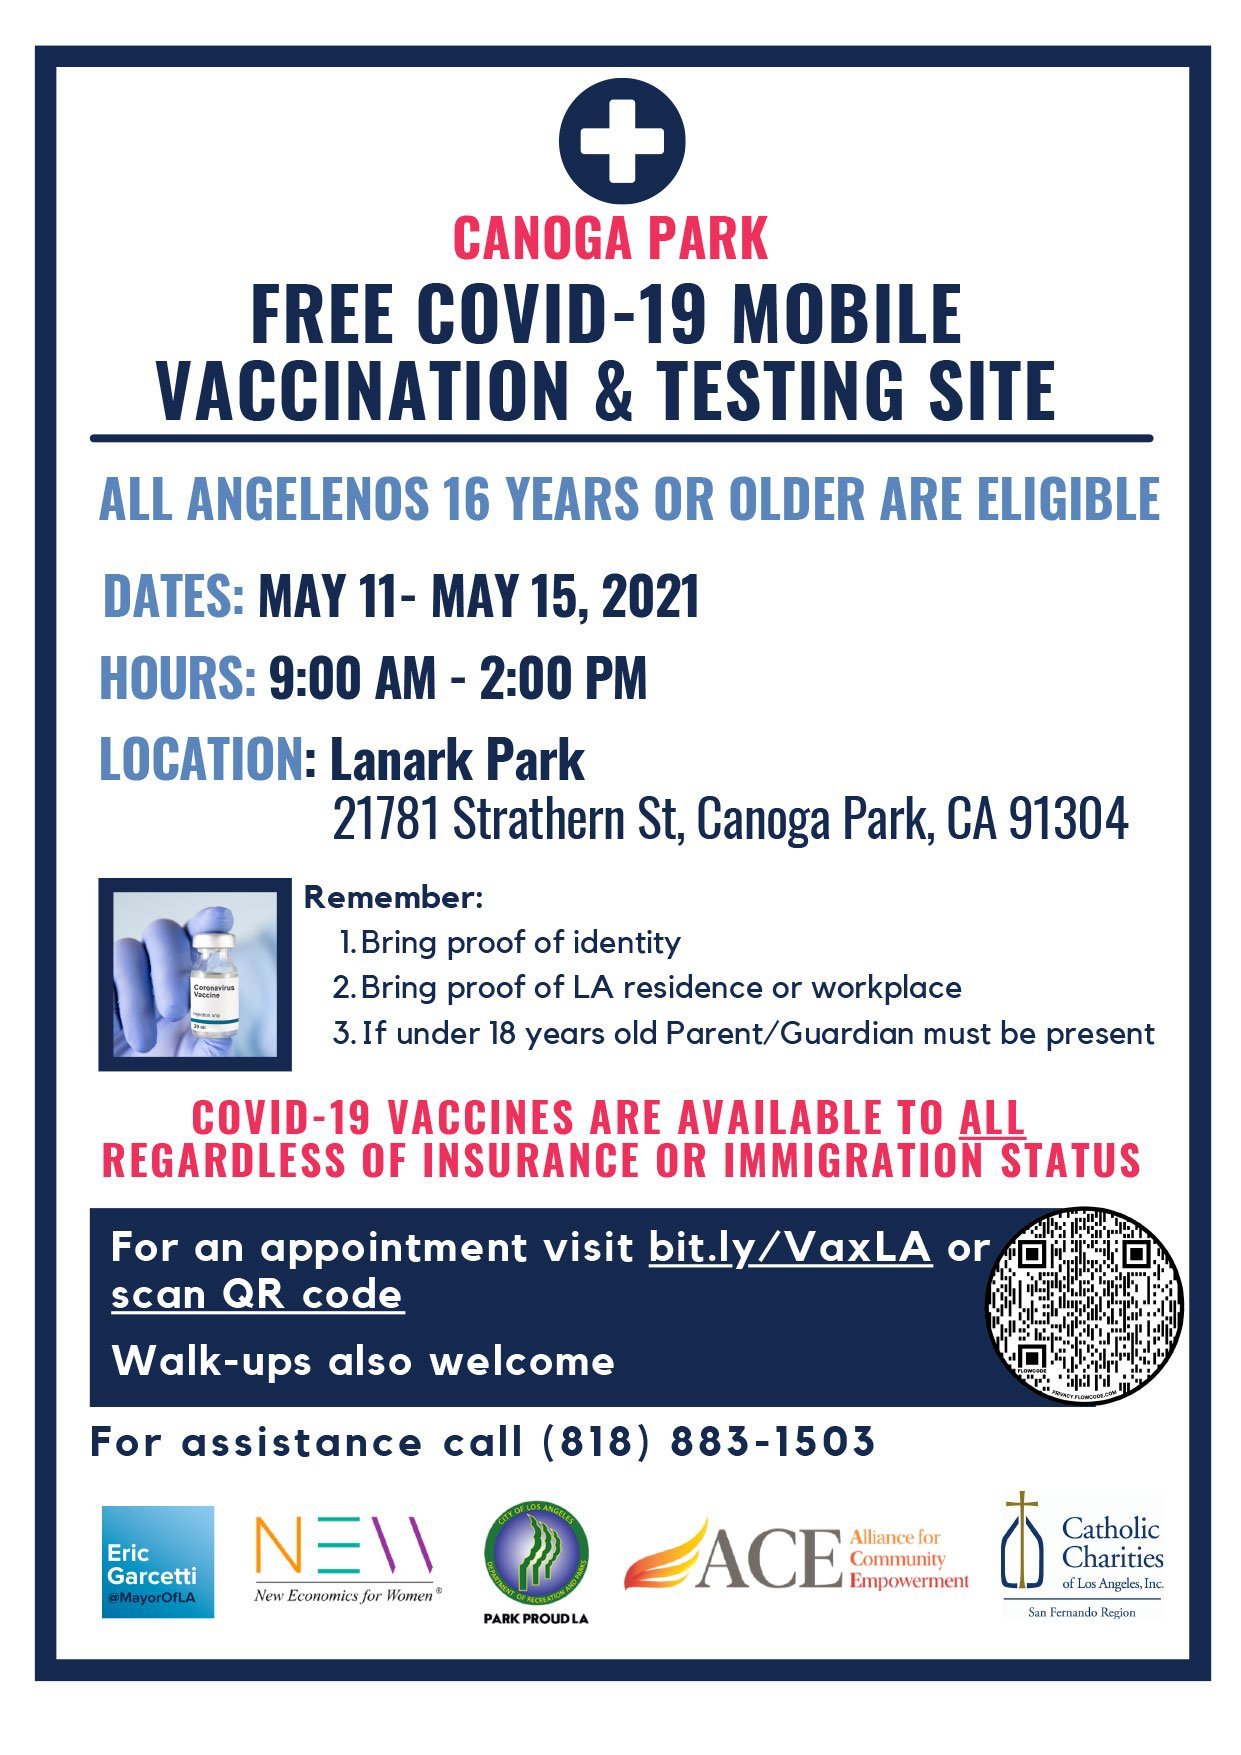 Free COVID-19 Mobile Vaccination and Testing Site